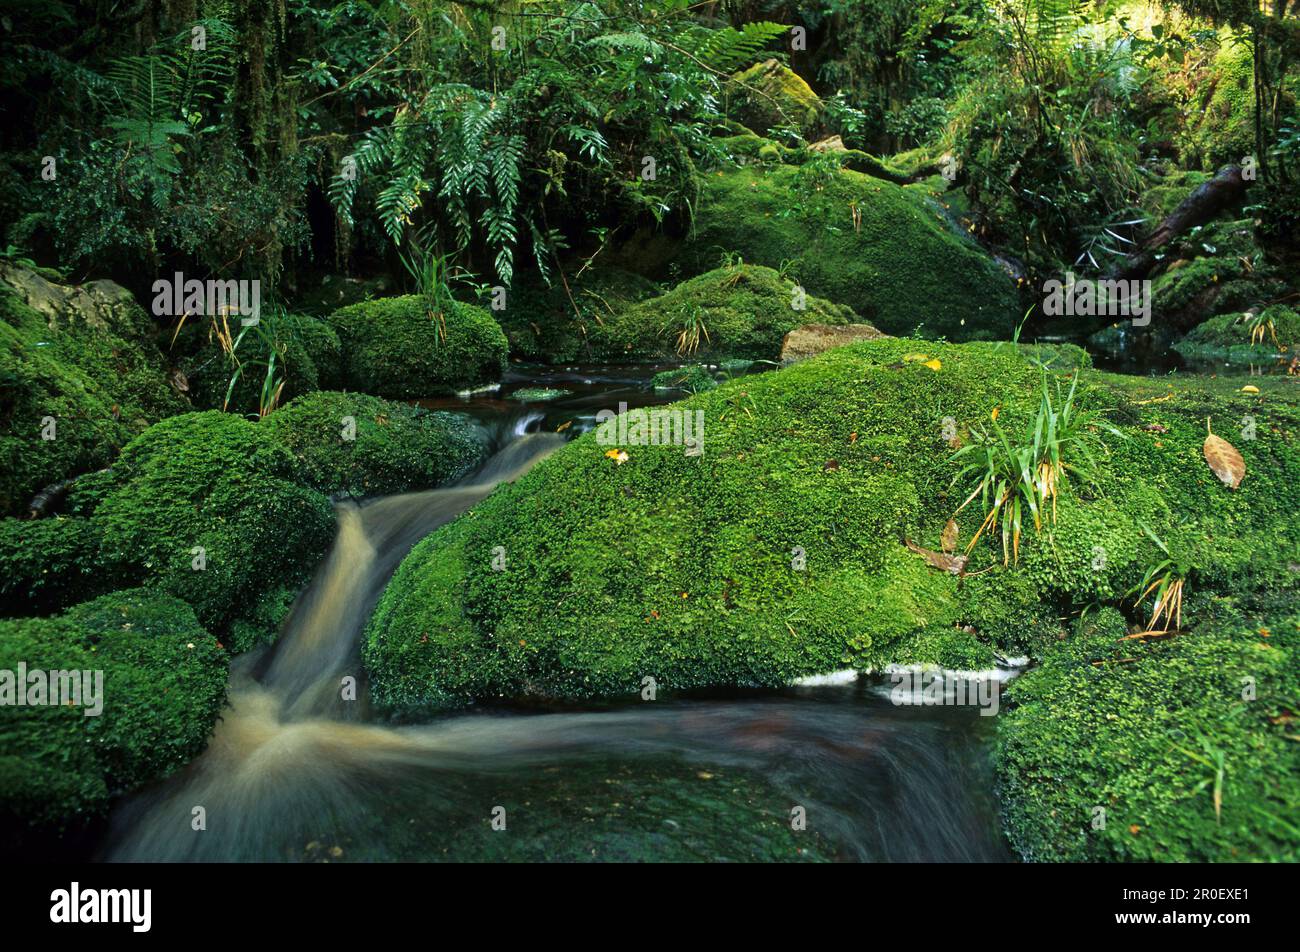 Stream and moss covered rocks in the rainforest, Oparara Basin, West Coast, South Island, New Zealand, Oceania Stock Photo